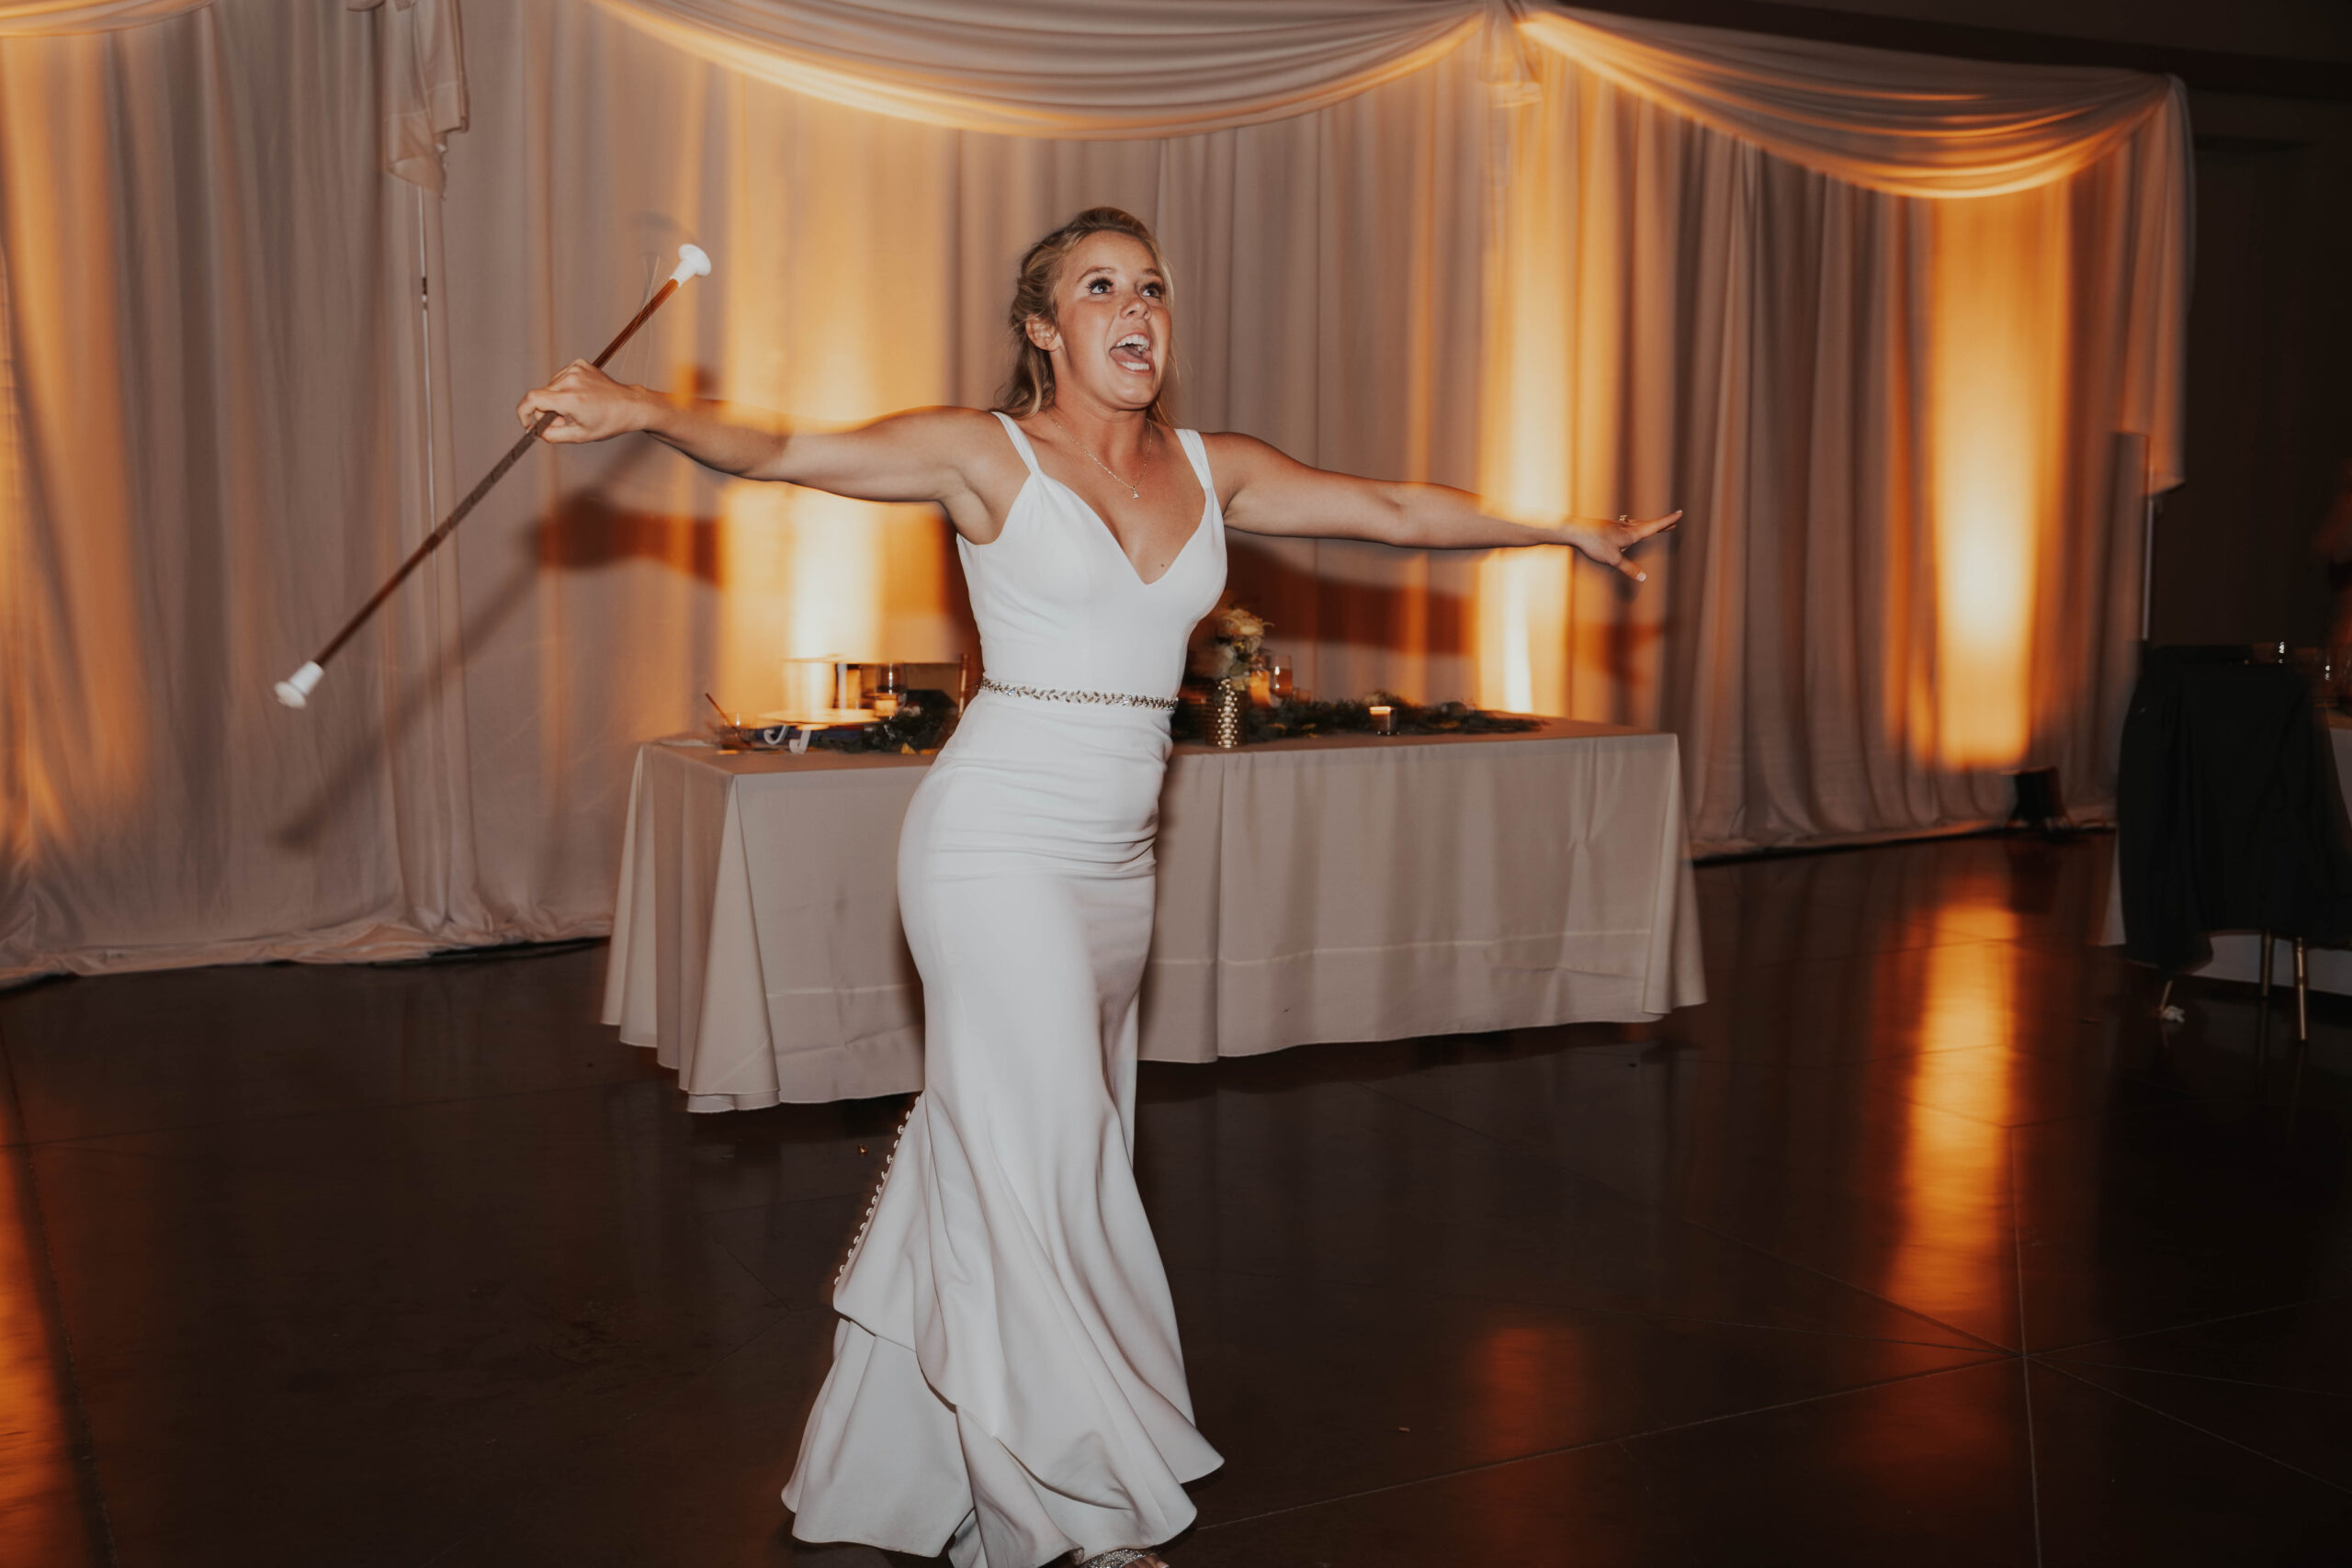 Bride Does Performance At Wedding